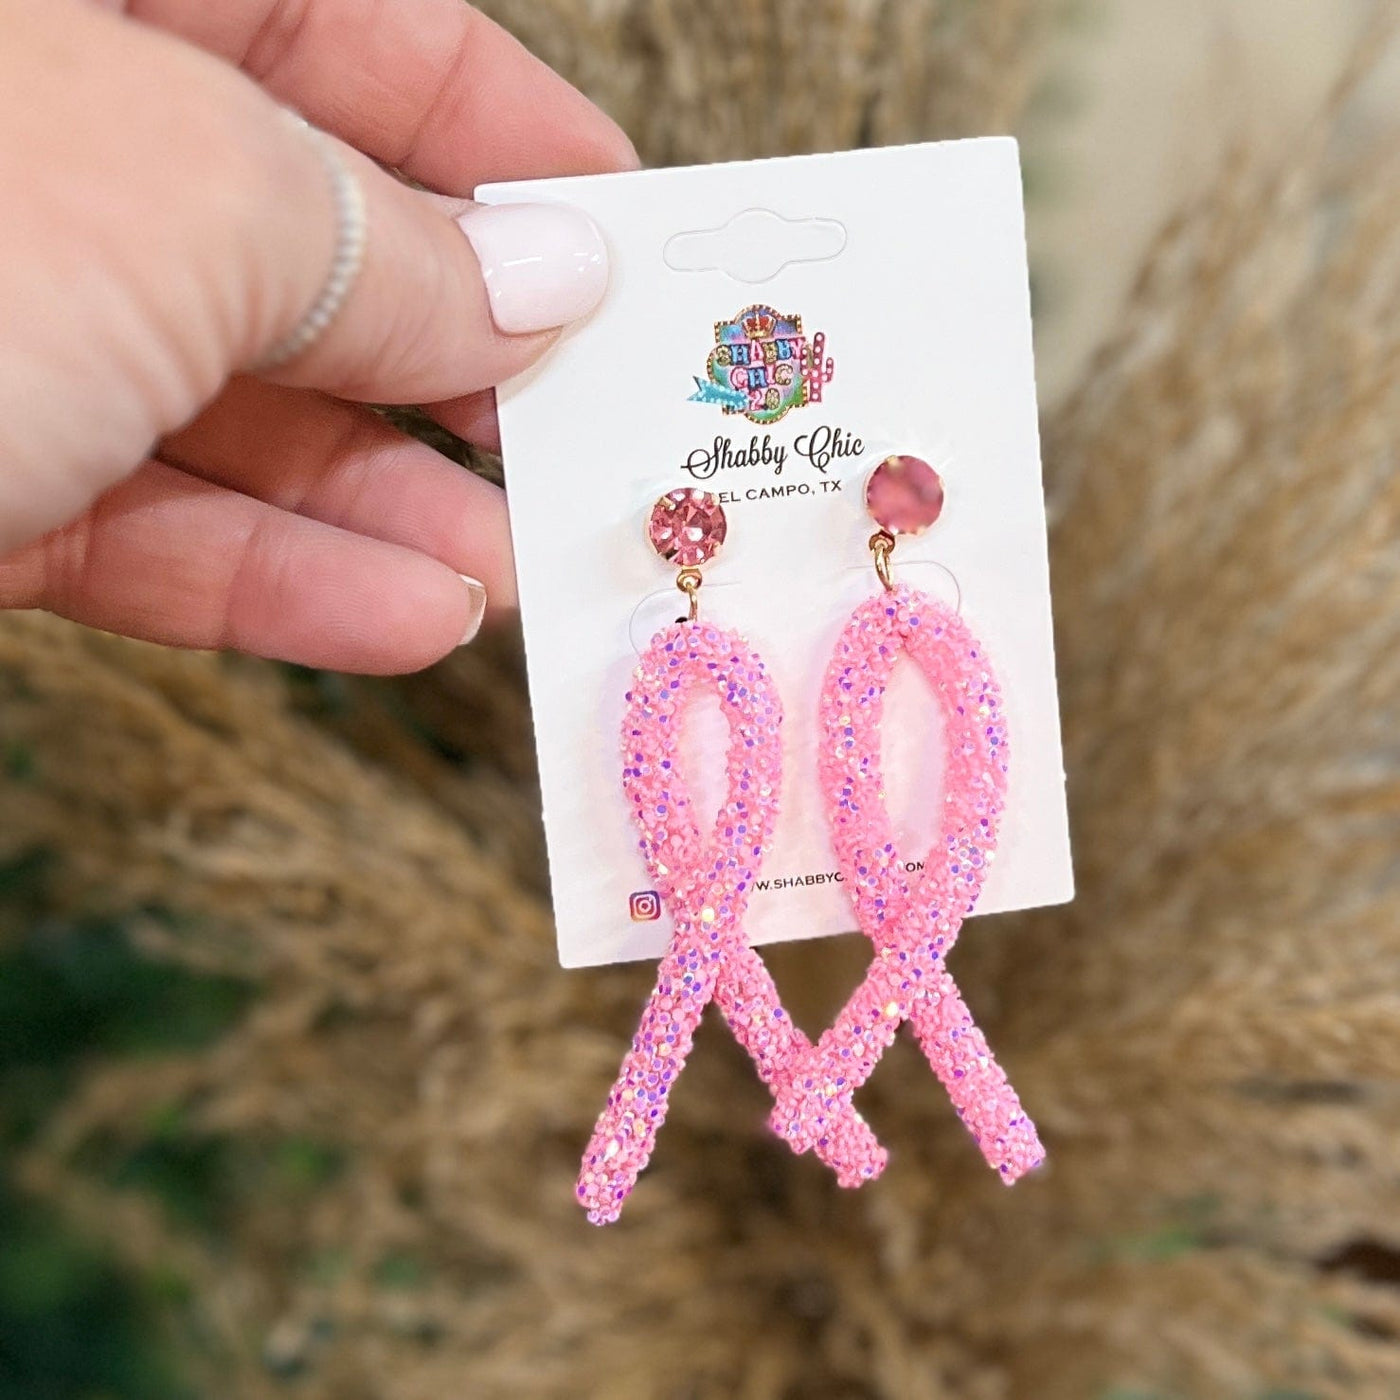 Breast Cancer Awareness Earrings Shabby Chic Boutique and Tanning Salon Glitter Ribbon Earrings